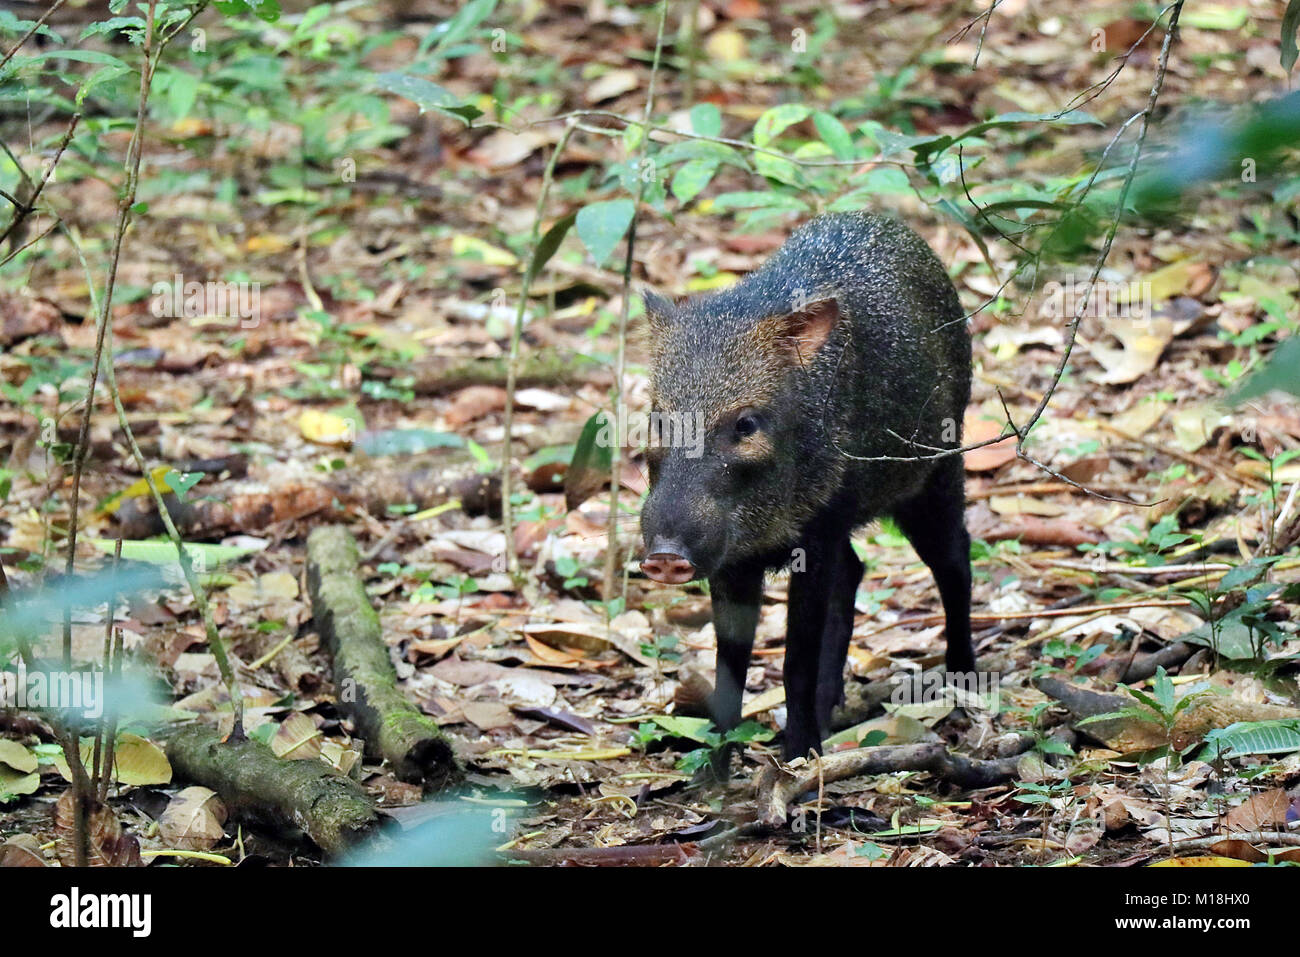 Collared Peccary (Pecari tajacu) walking through the rainforest undergrowth in the Corcovado National Park, Costa Rica. Stock Photo